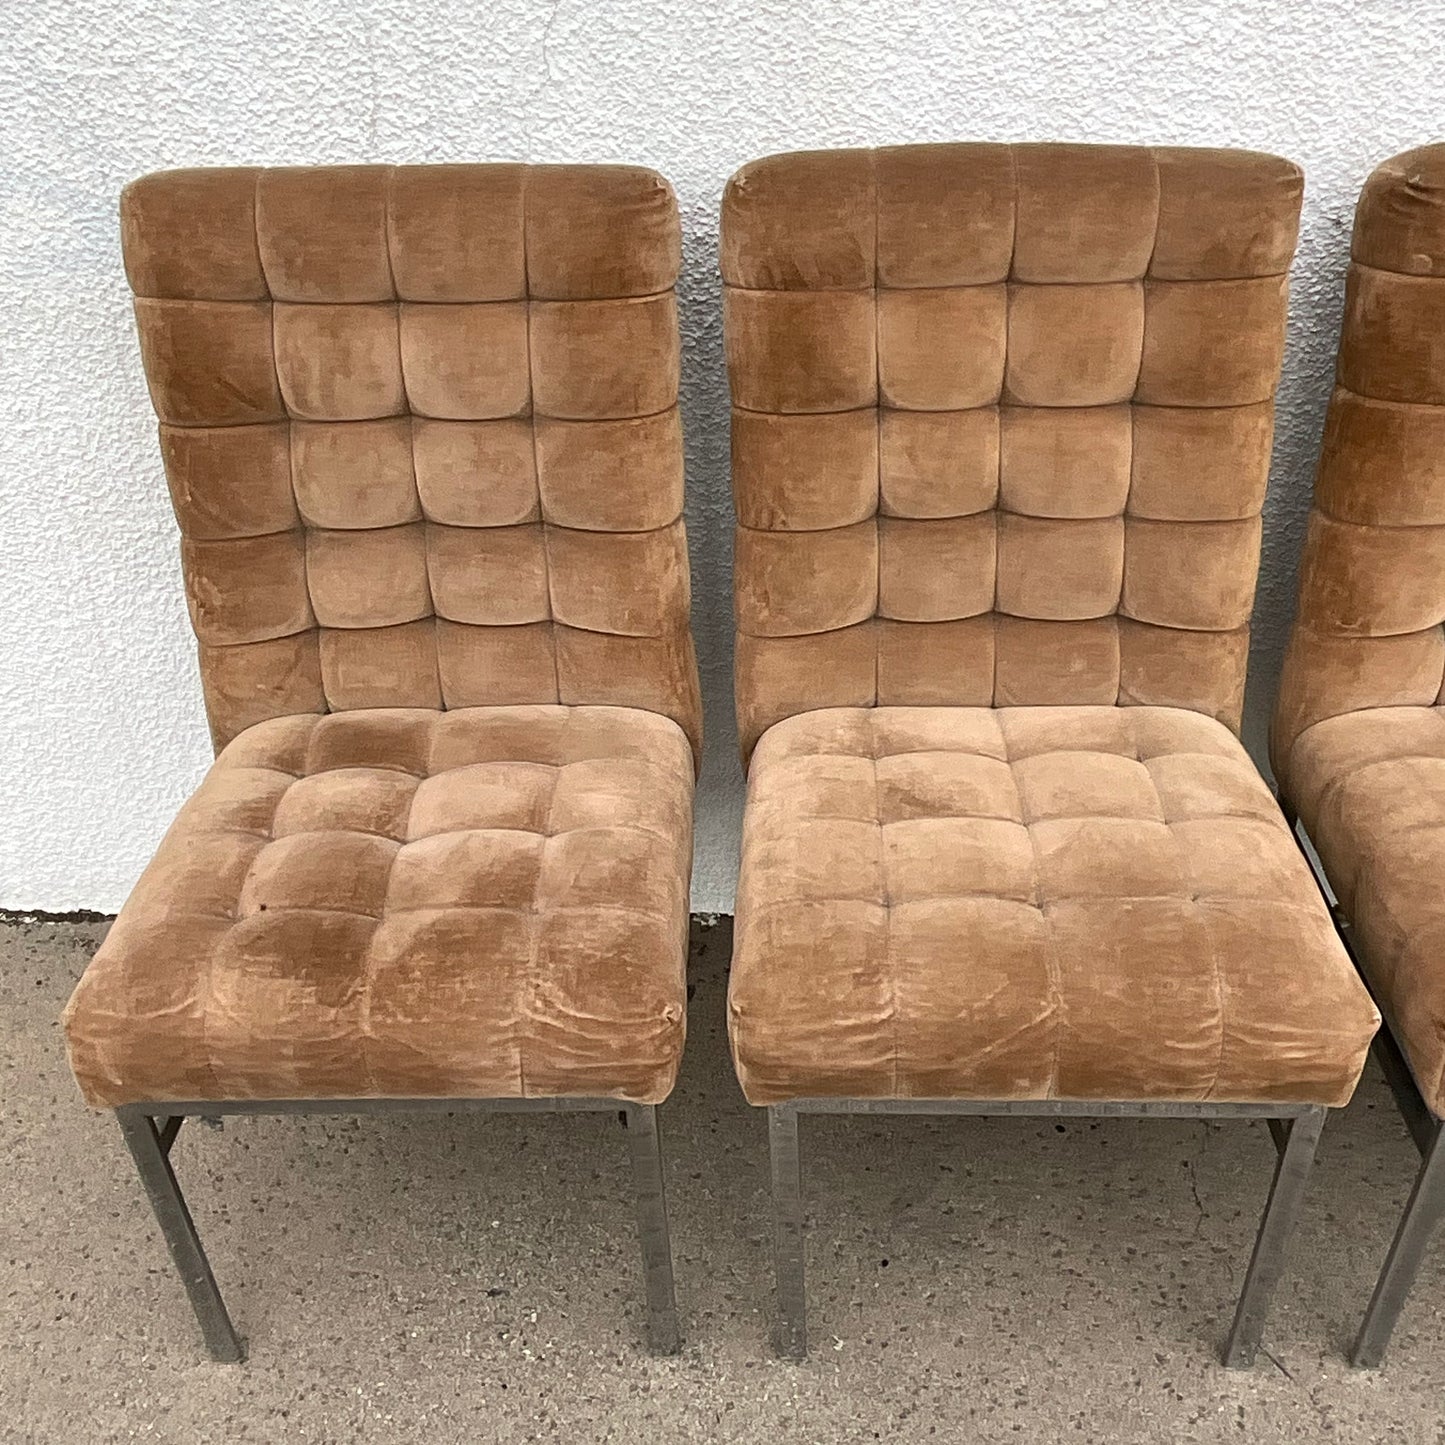 Set of 4 Pierre Cardin Dining Chairs